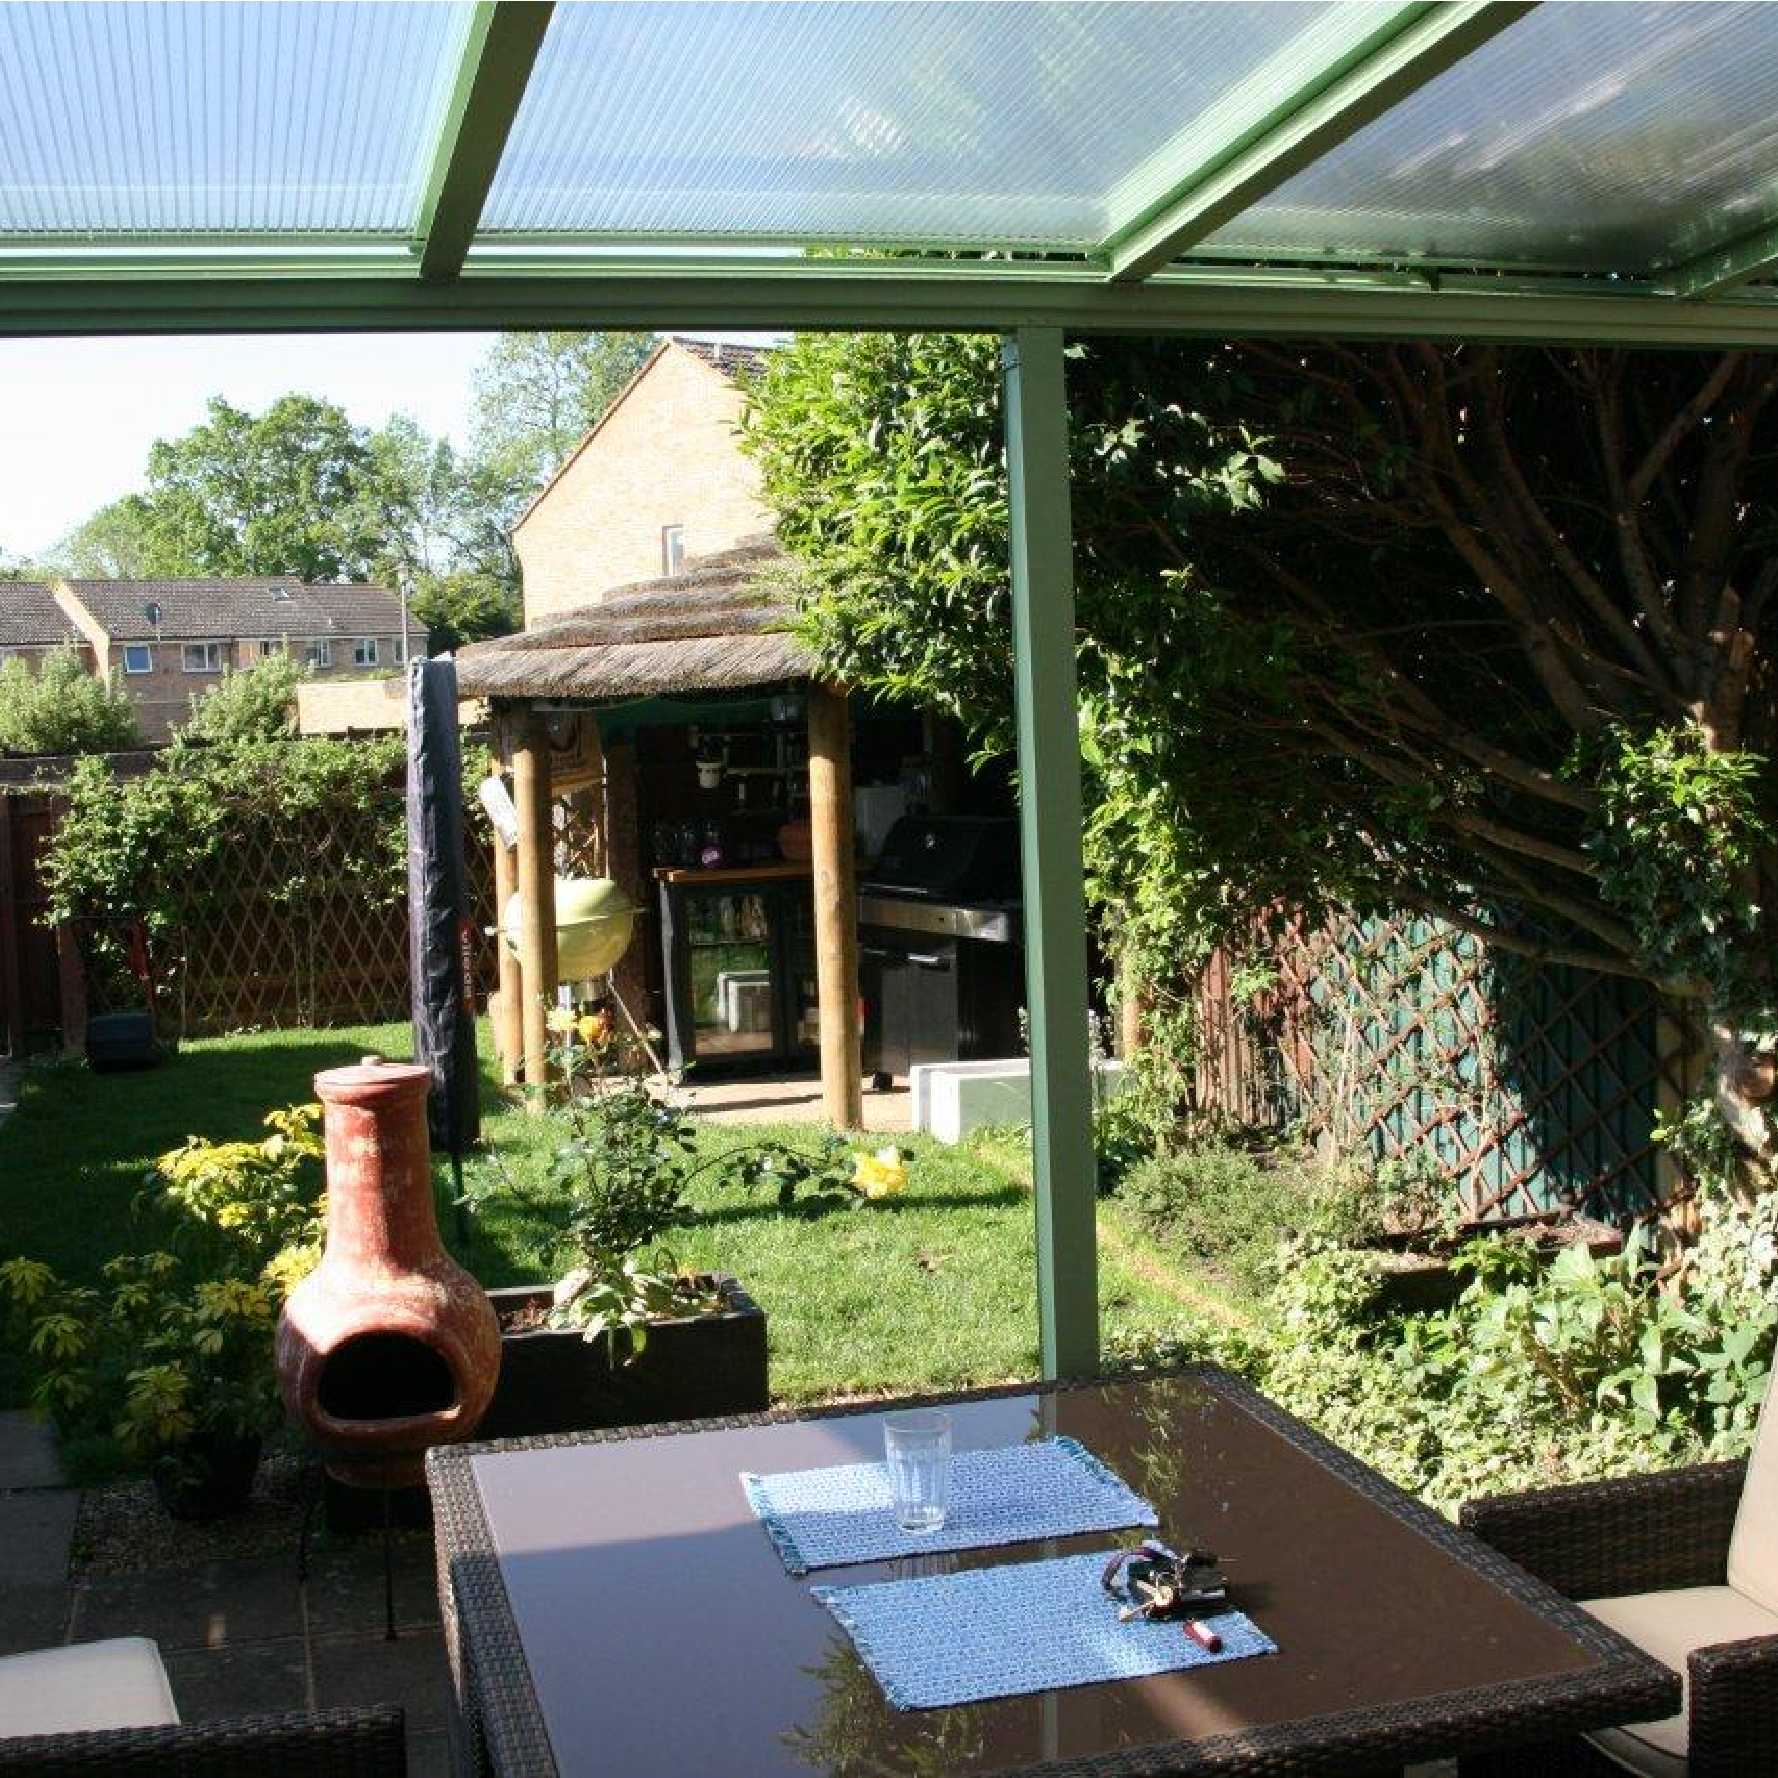 Affordable Omega Smart Lean-To Canopy, White with 16mm Polycarbonate Glazing - 6.3m (W) x 2.0m (P), (4) Supporting Posts